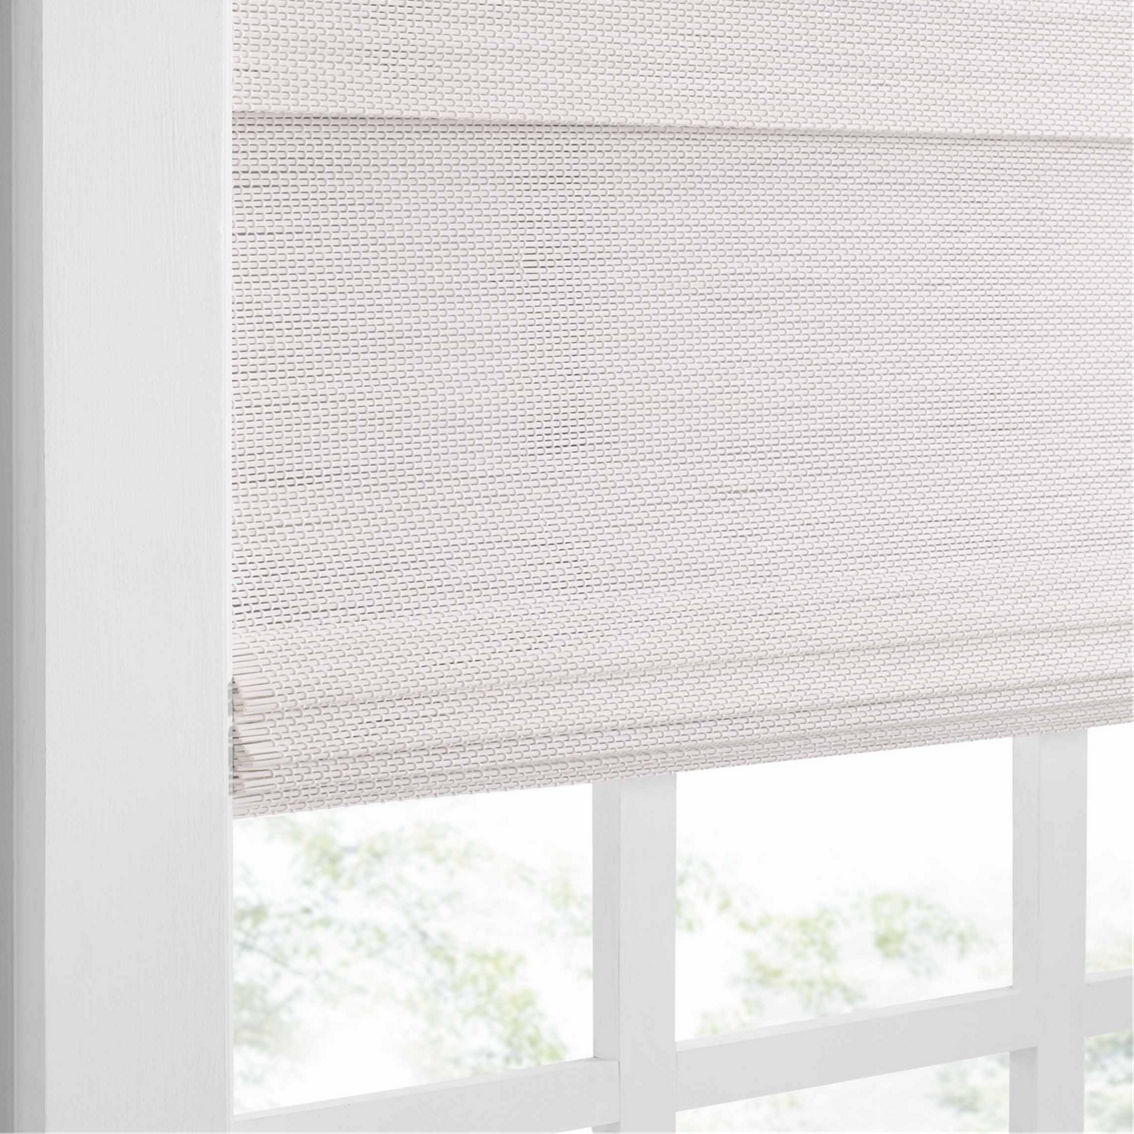 Eclipse Bamboo Cordless Light Filtering 72 in. Long Privacy Roman Shade - Image 3 of 5